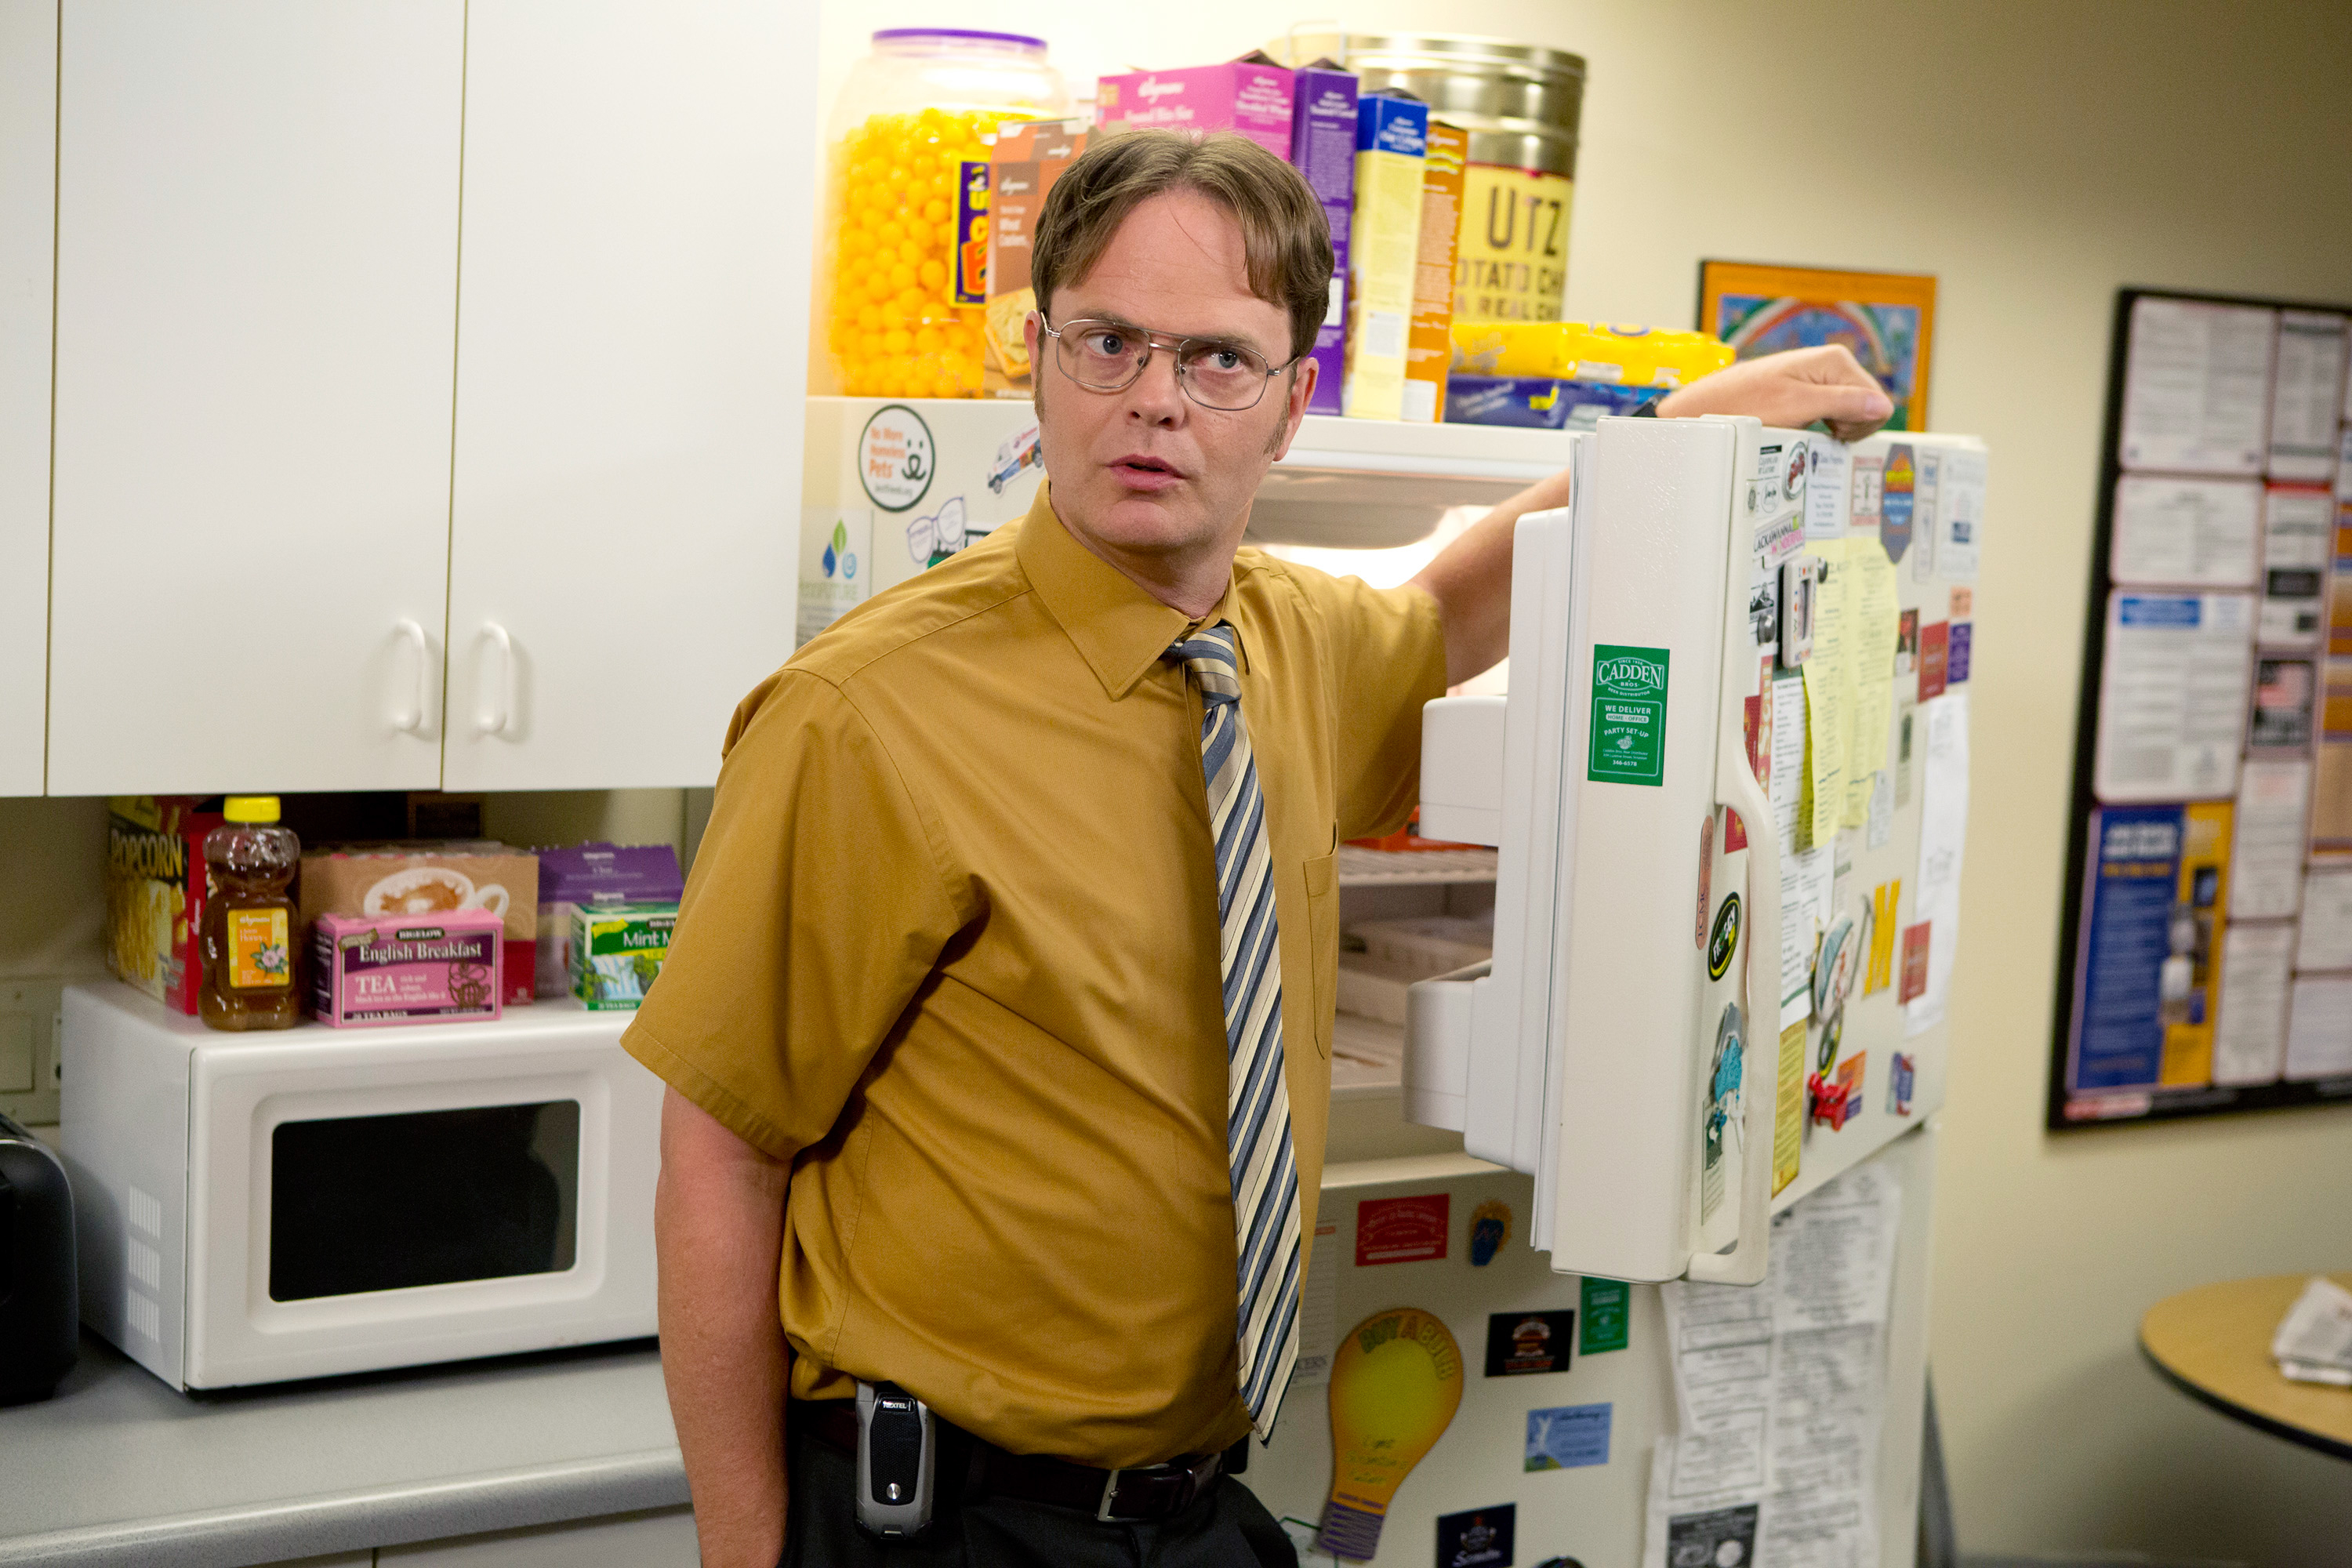 Man as TV character Dwight from &quot;The Office&quot; standing by an open fridge in an office kitchen